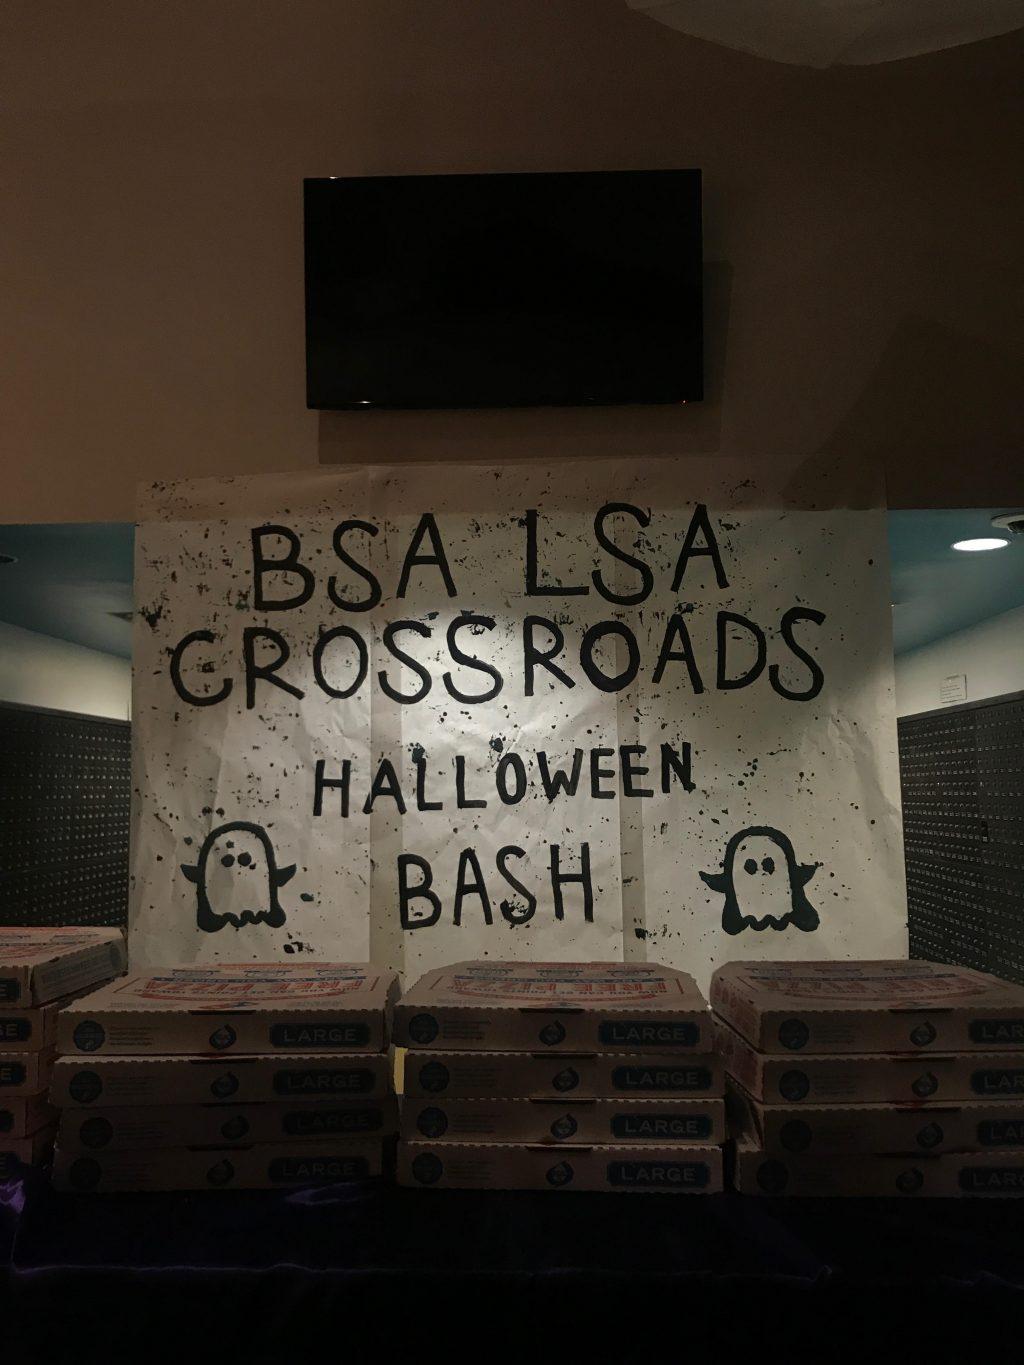 The Latino/a/x Student Association partnered with the Black Student Association and Crossroads for a Halloween Bash last October at the Sandbar on the Malibu Campus. Club members came together for pizza and dancing to celebrate Halloween. Photo courtesy of Isabella Mendoza